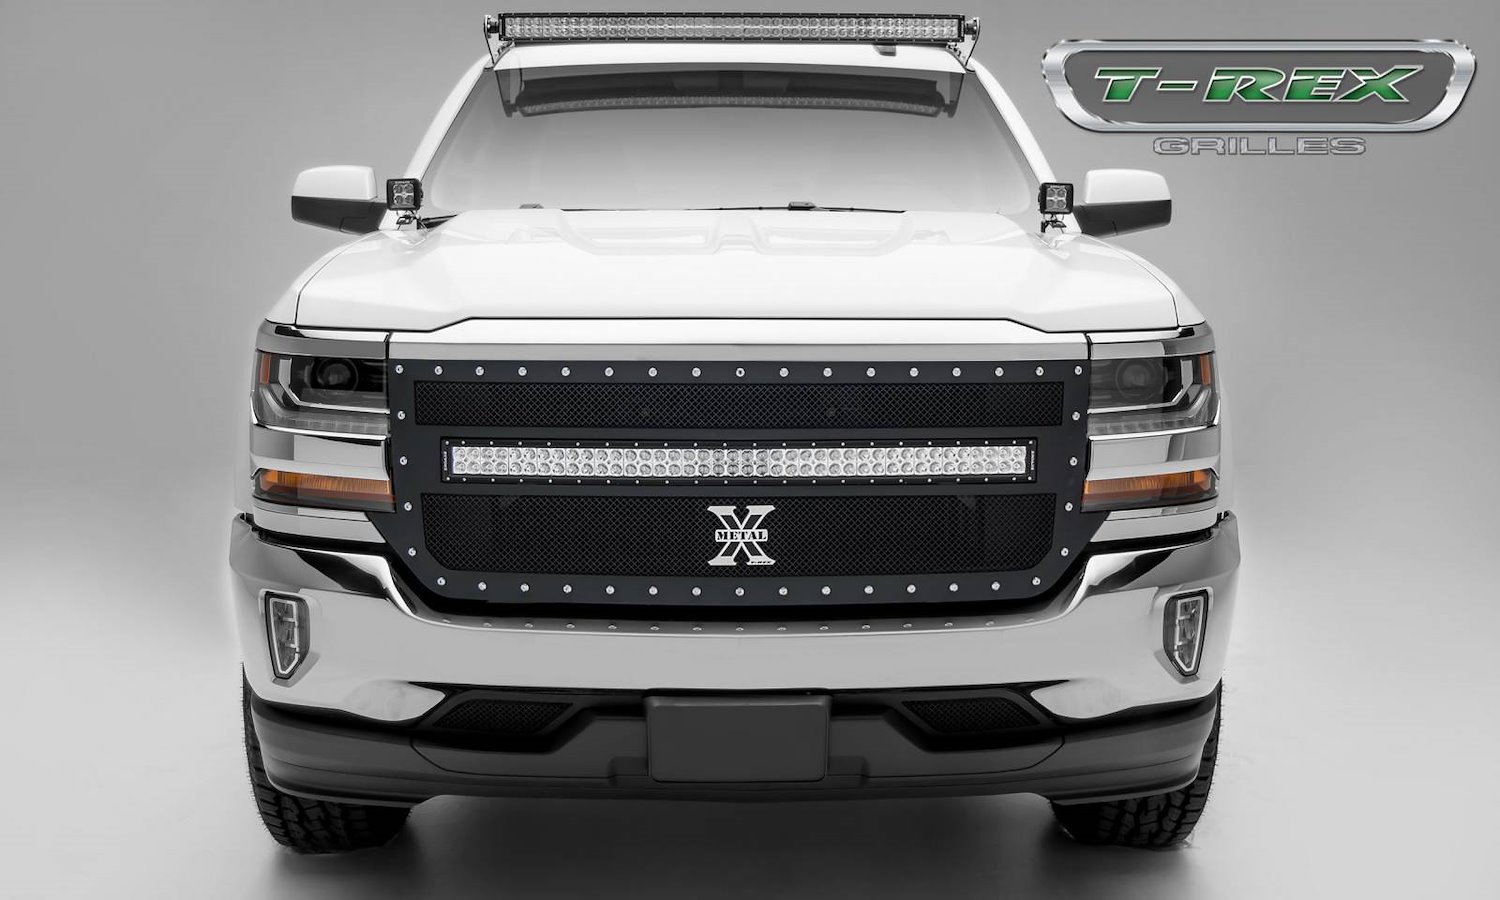 Chevrolet Silverado 1500 Torch Series 1 40 Led Light Bar Middle Main Grille Replacement W/ Small Mes